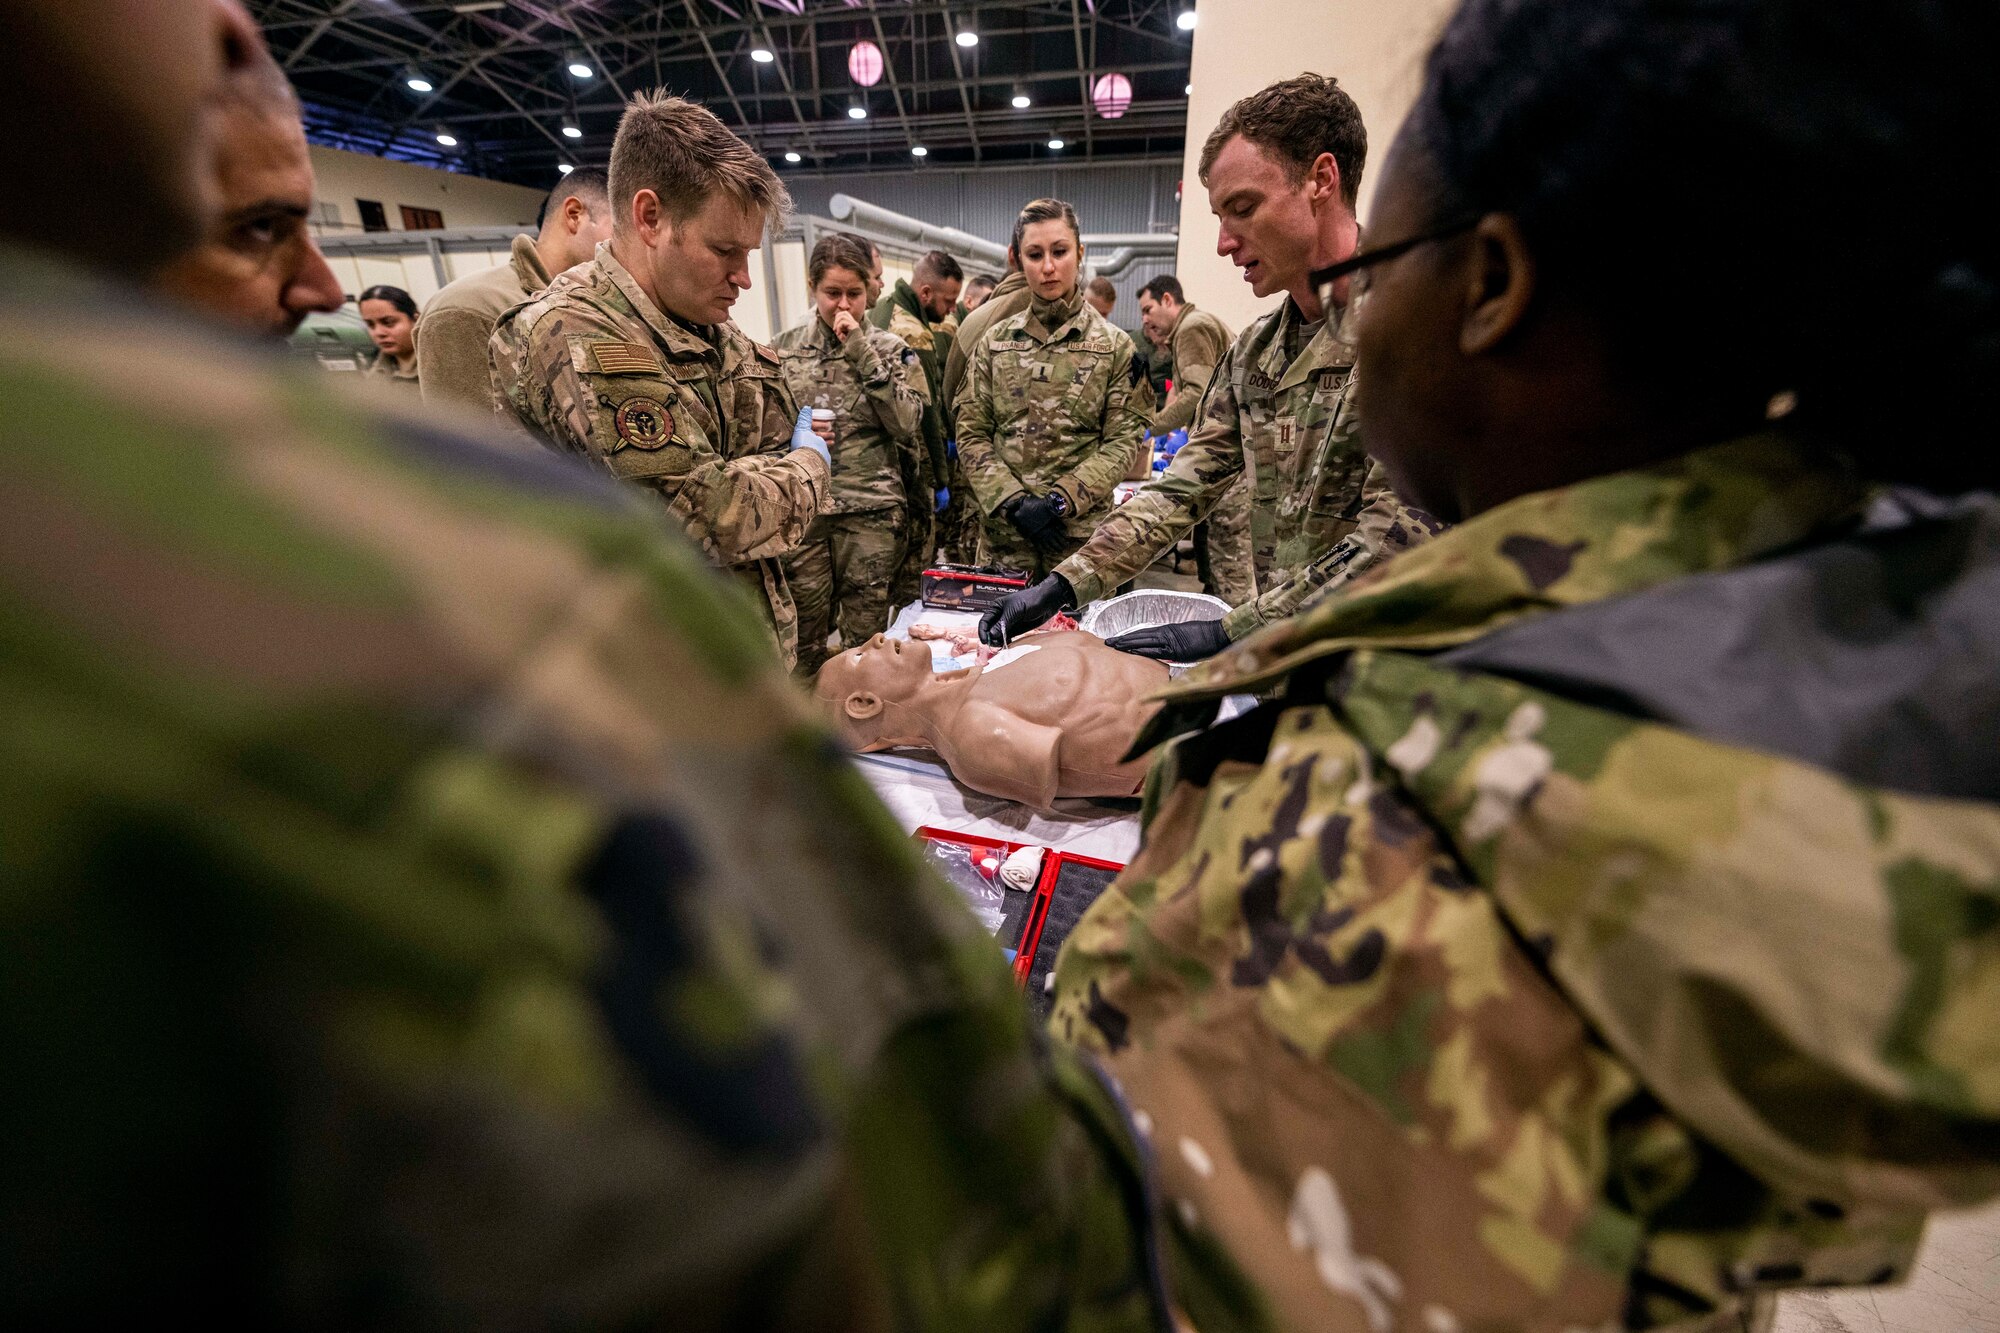 The 39th Medical Group hosted a Tactical Combat Casualty Care course open to various NATO partners at Incirlik Air Base, Turkey, March 25-26, 2022. During the course, participants learned to implement medical care under fire, tactical field care, and tactical evacuation during combat situations. The course facilitated partnerships with various NATO and joint forces, improved medical readiness, exposed medics to a unique and challenging environment and prepared both medics and non-medics to care for patients in hazardous conditions. The 39th MDG plans to provide these trainings regularly to continue bolstering partnerships and coordination among diverse teams, further expanding participants’ capabilities in the field and understanding of TCCC operations.